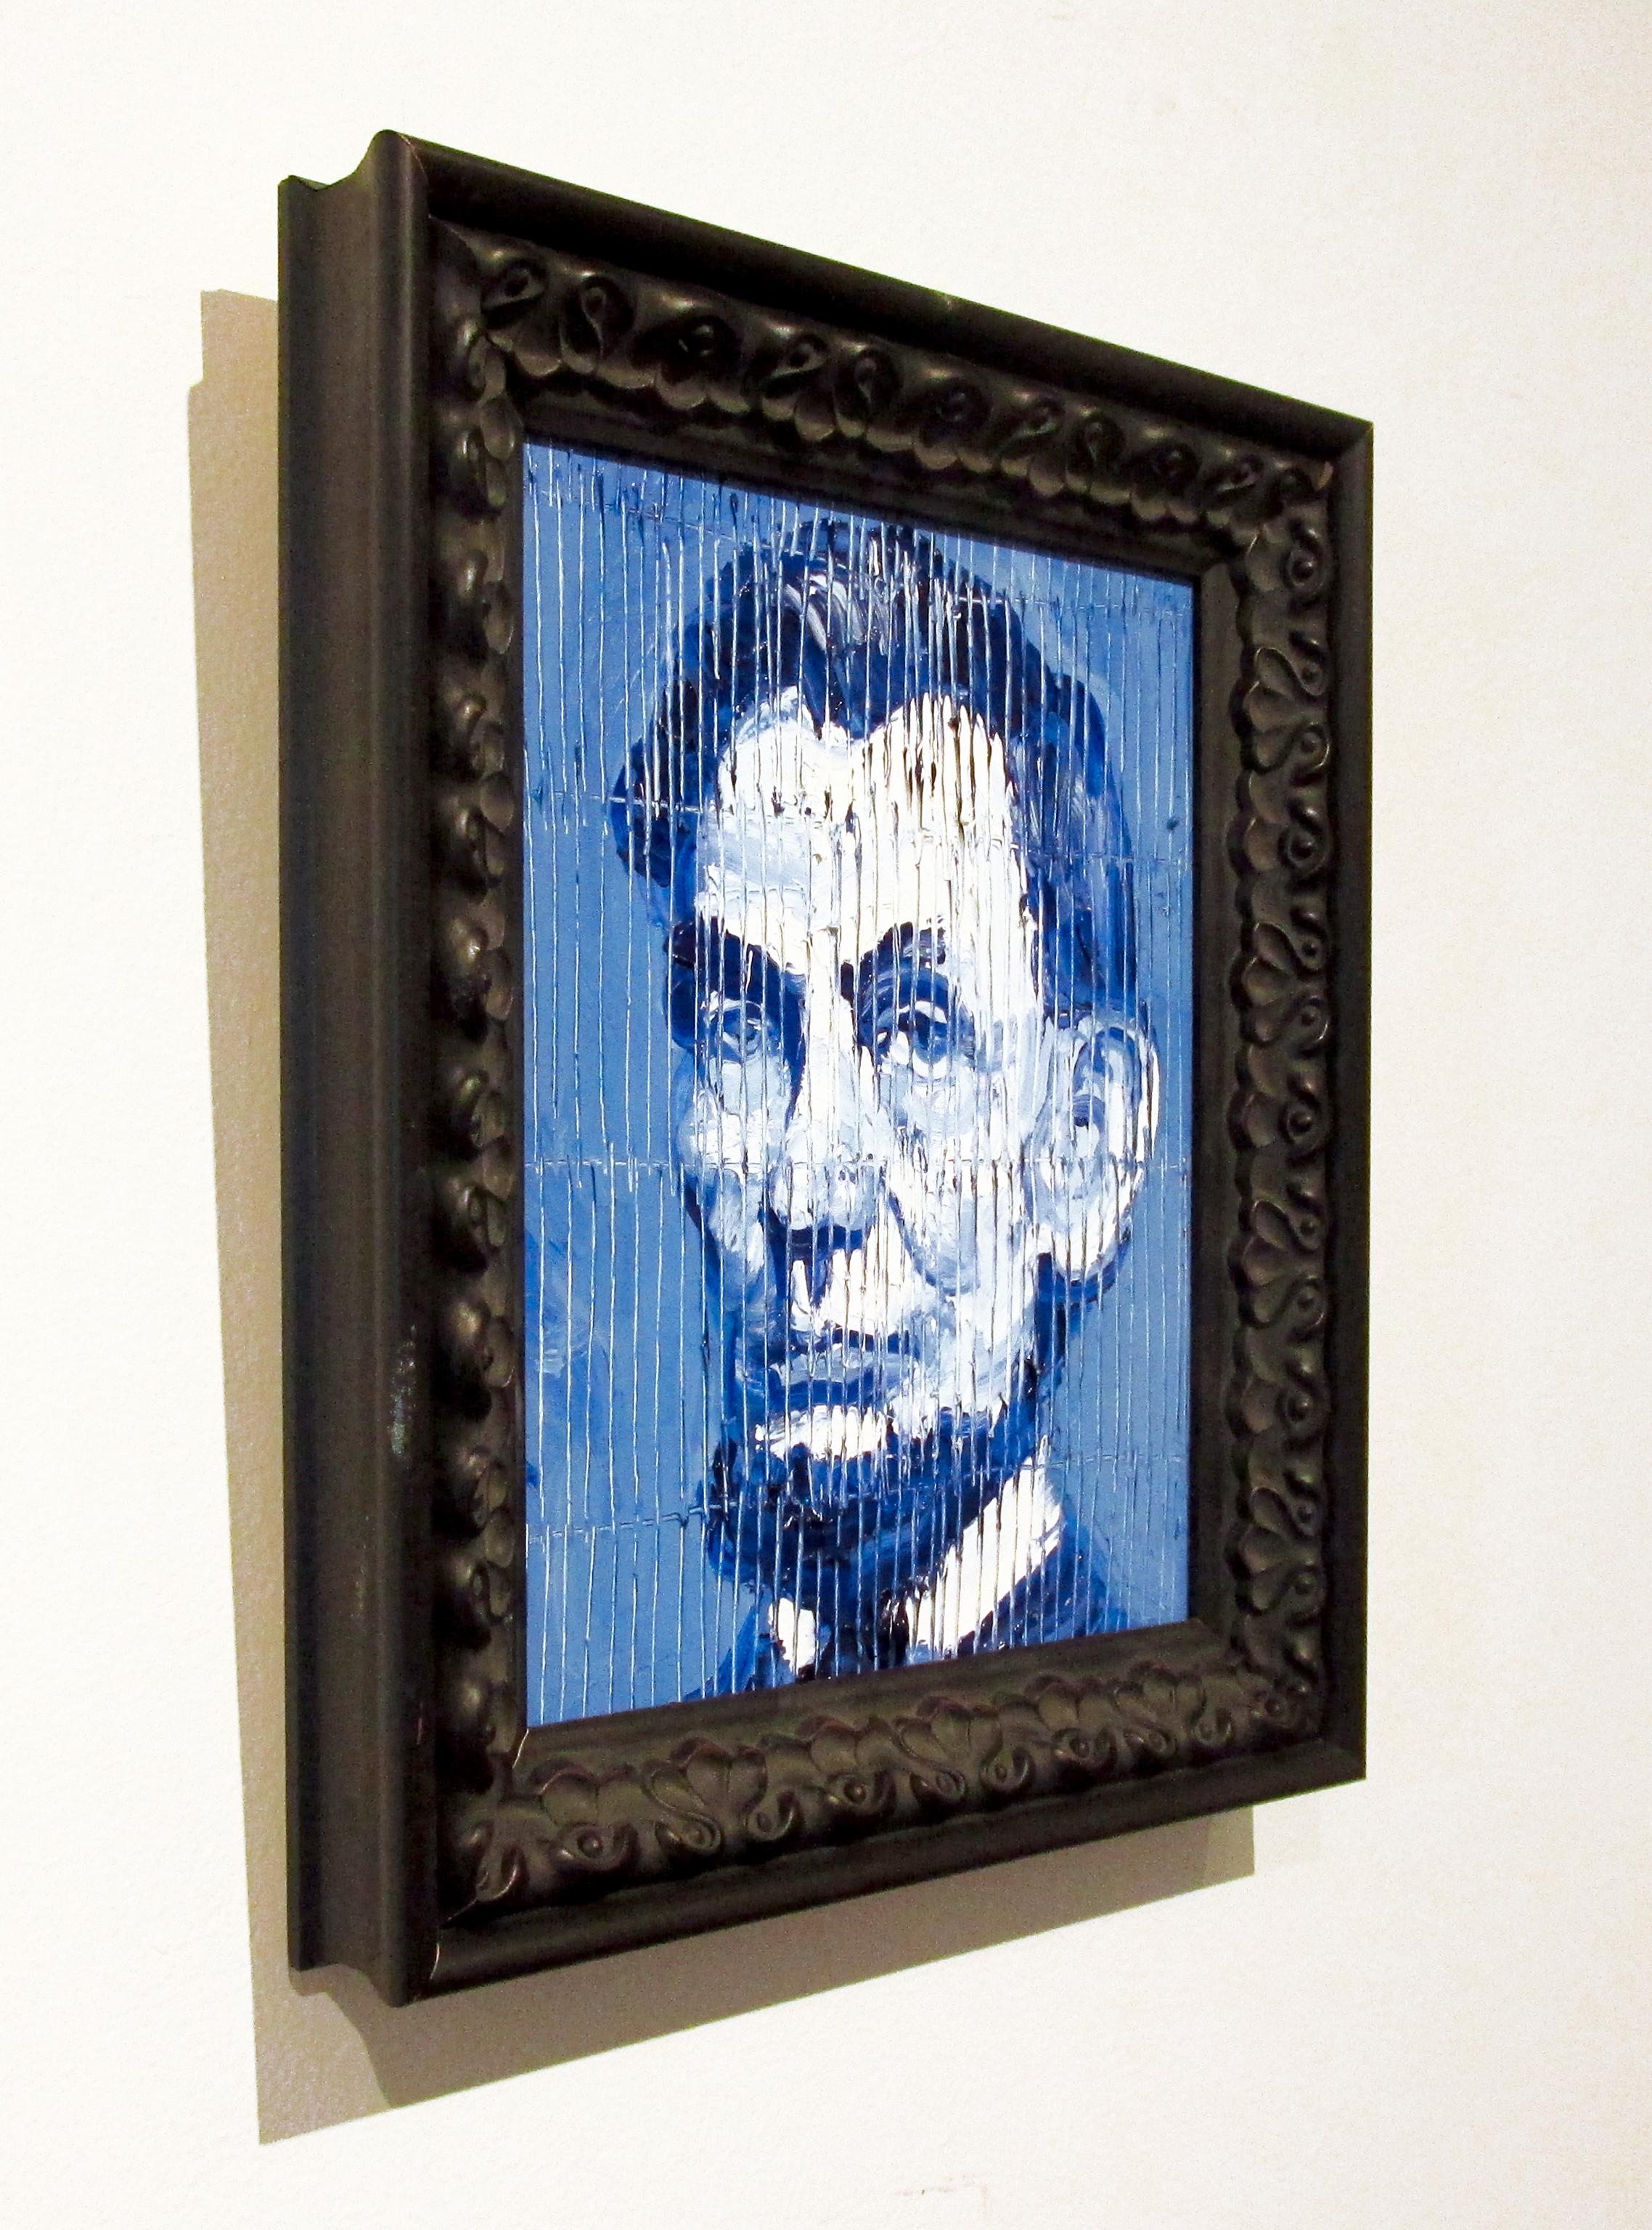 Artist:  Slonem, Hunt
Title:  Abe Lincoln
Series:  Abe Lincoln
Date:  2020
Medium:  Oil on wood
Unframed Dimensions:  10